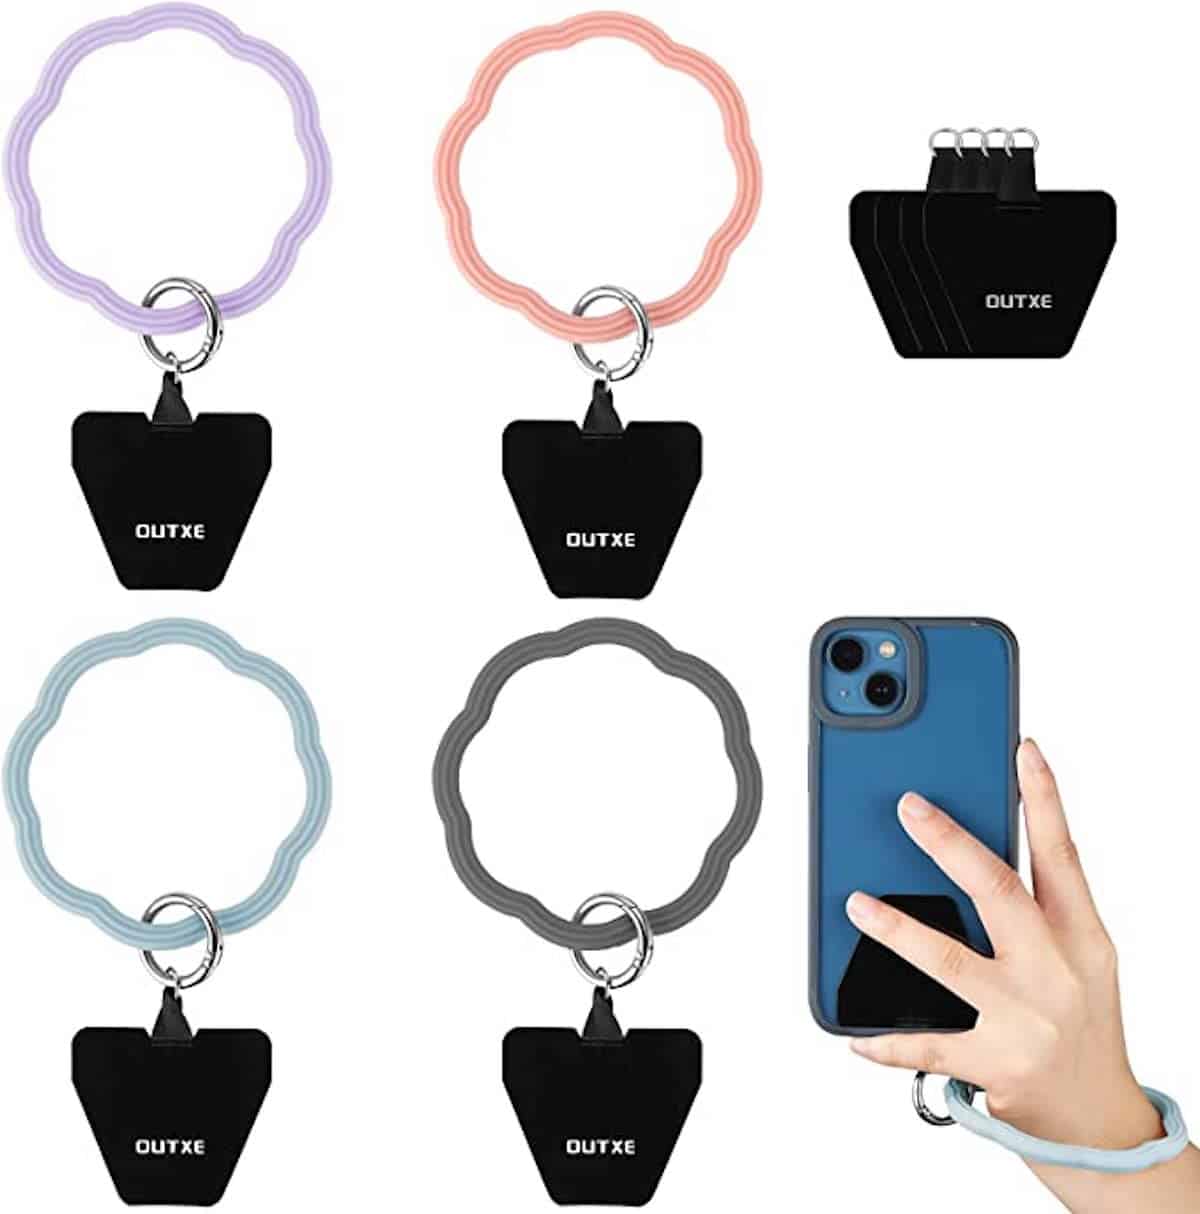 Best Travel Accessories for Women: A Phone Wrist Strap